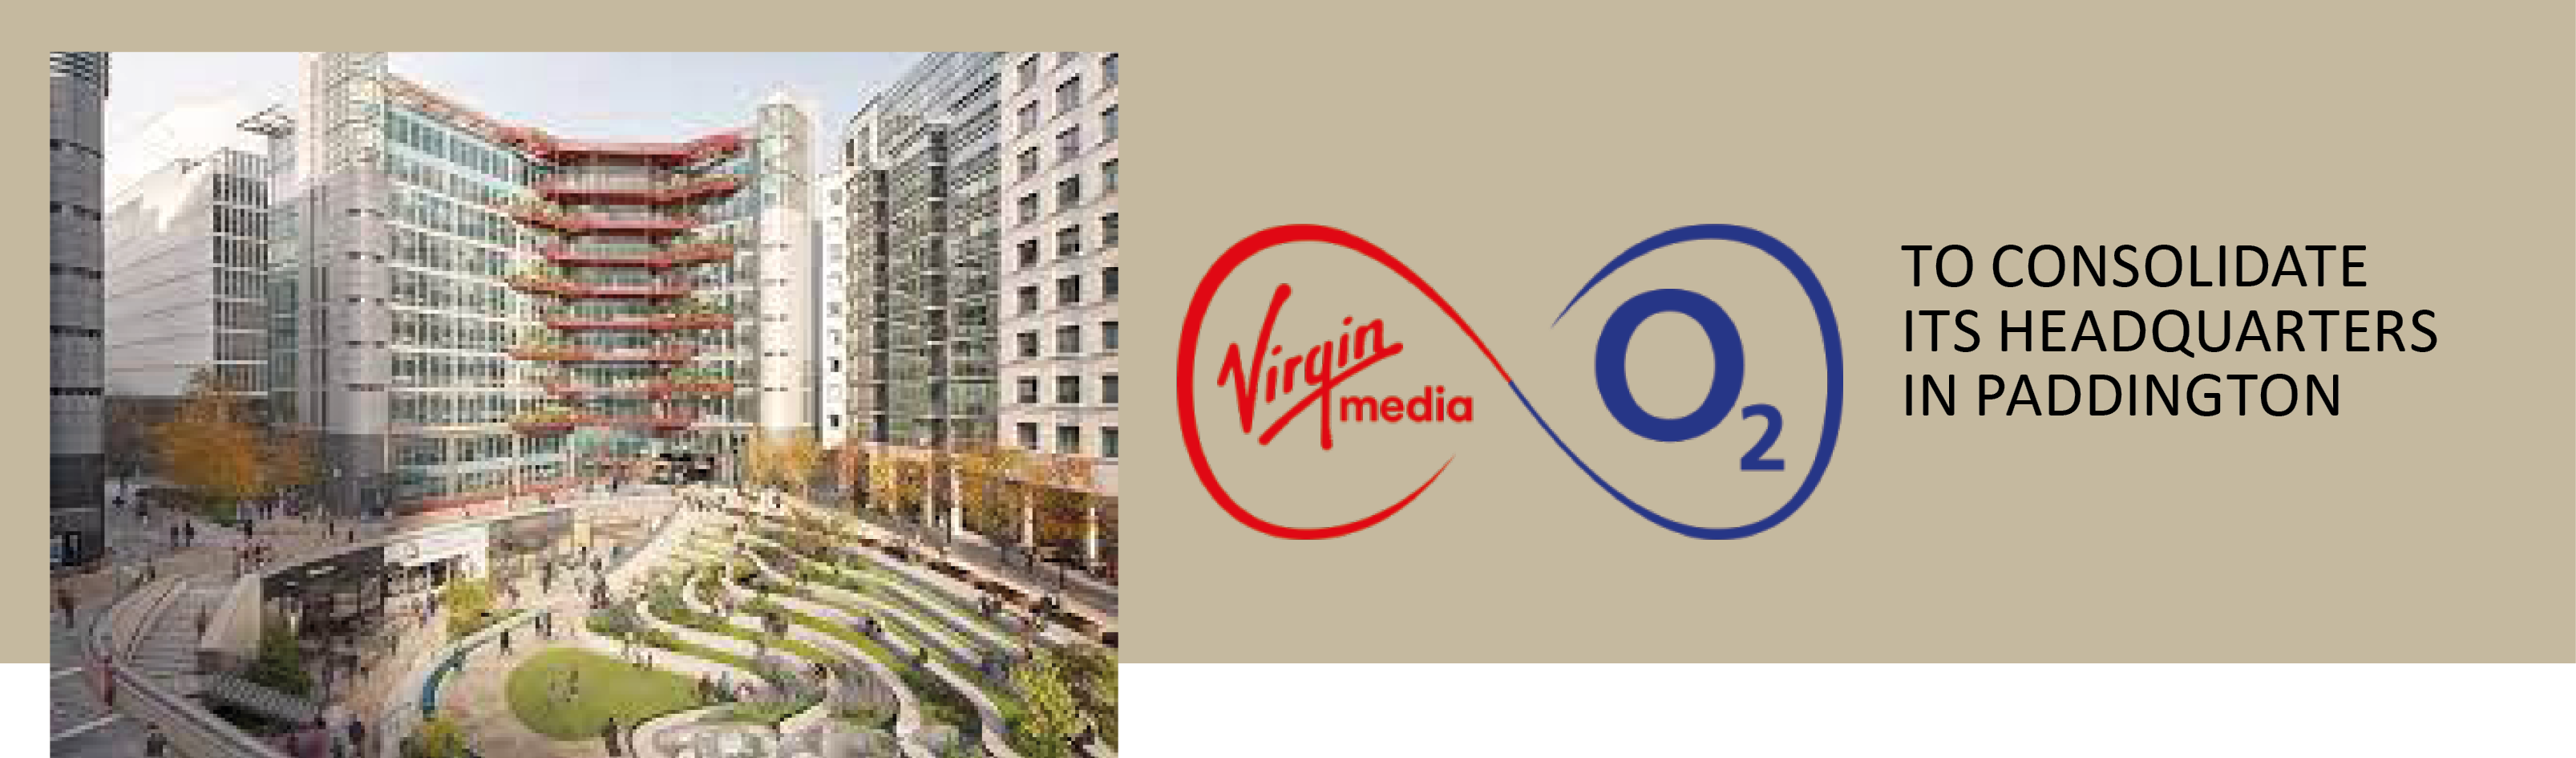 Virgin Media 02 to consolidate its hq in Paddington